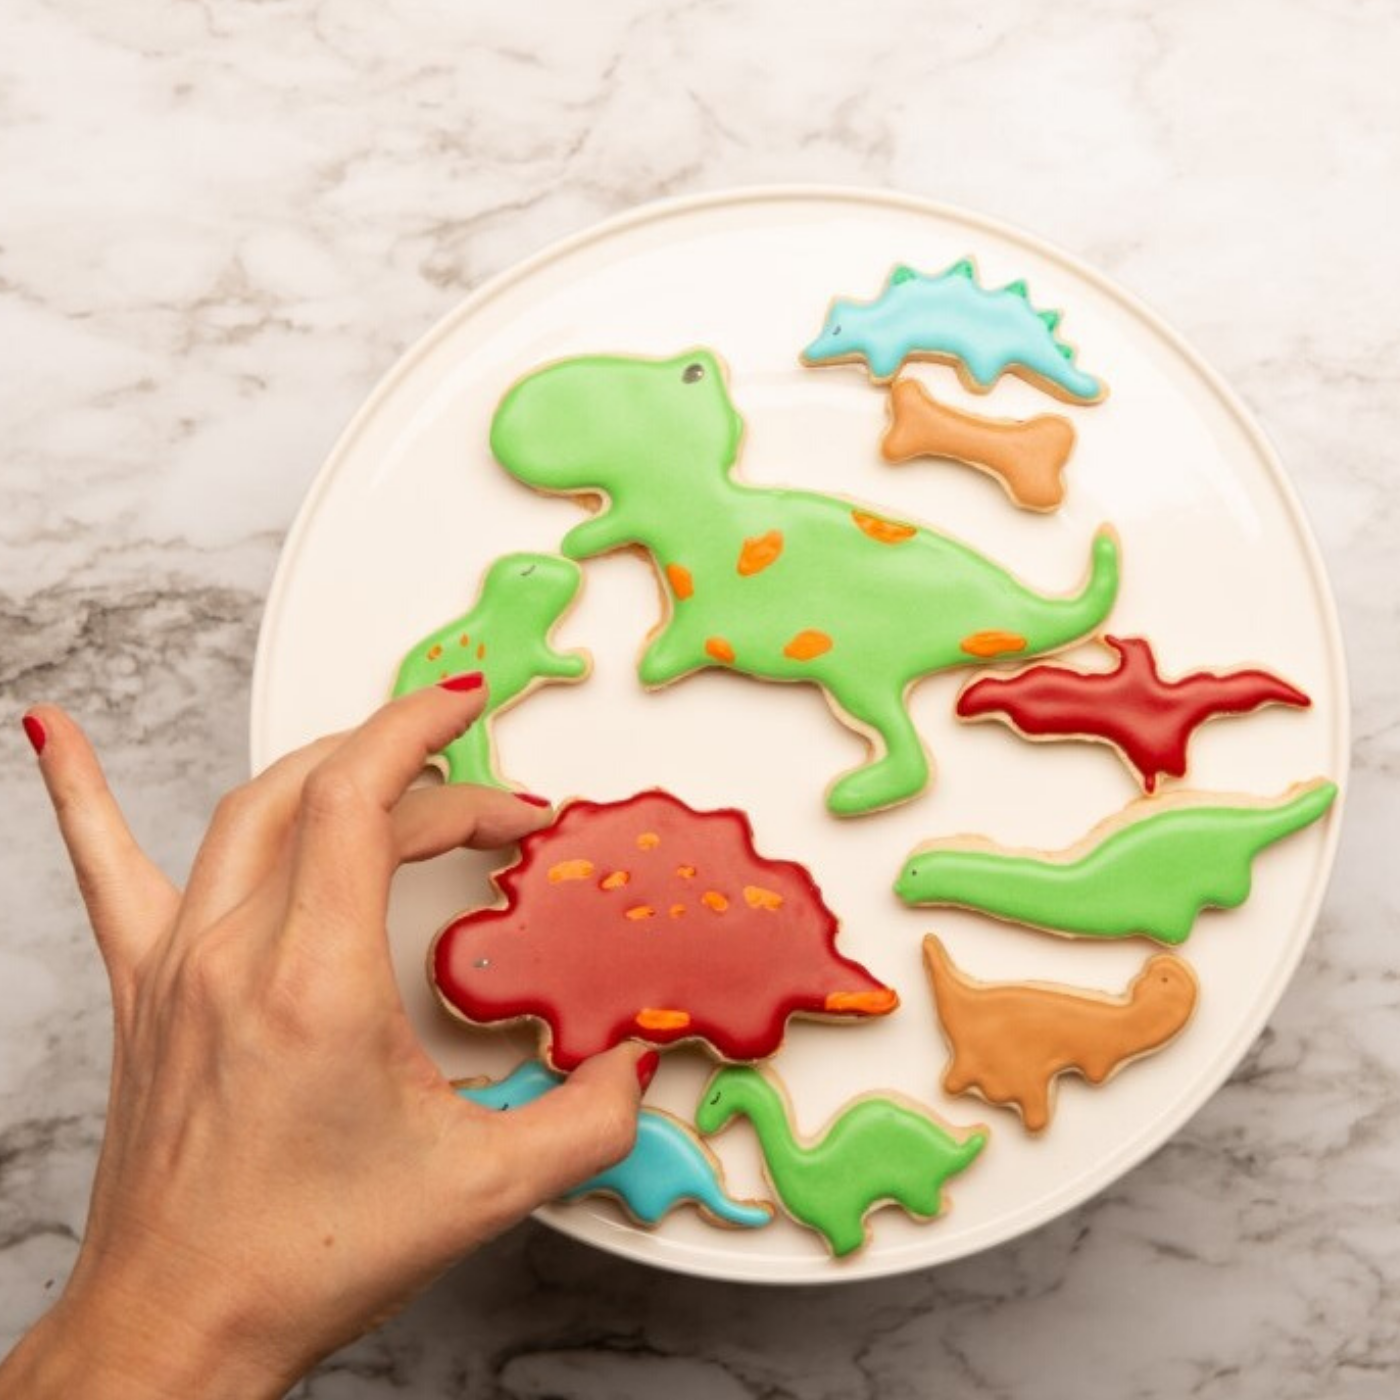 Frosted and decorated dinosaur shaped cookies made using Dinosaur Shape 10 Piece Kids Cookie Cutter Set 